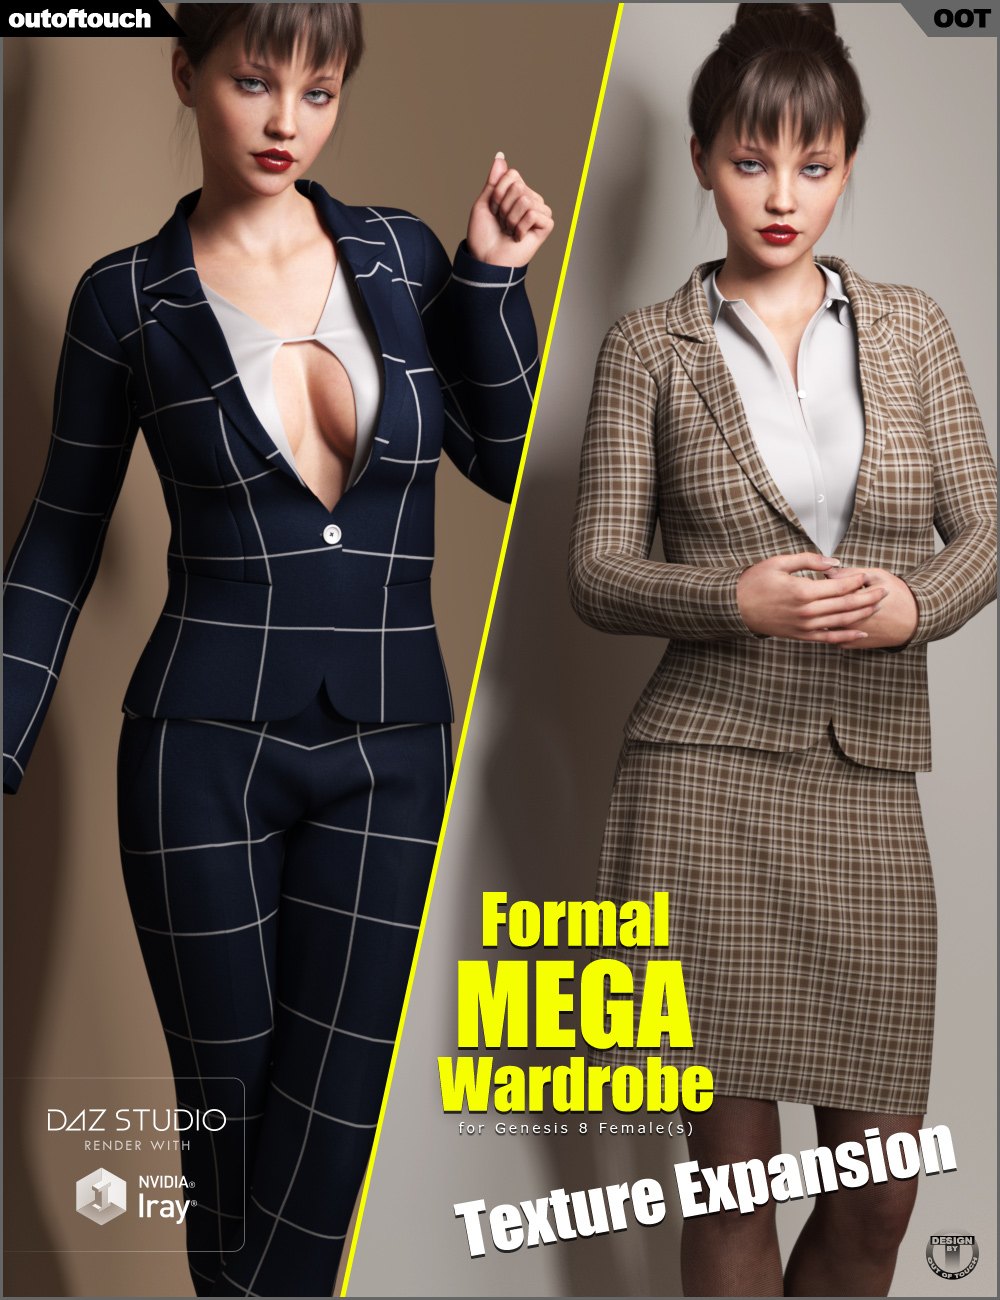 Formal MEGA Wardrobe for Genesis 8 Female(s) Texture Expansion by: outoftouch, 3D Models by Daz 3D